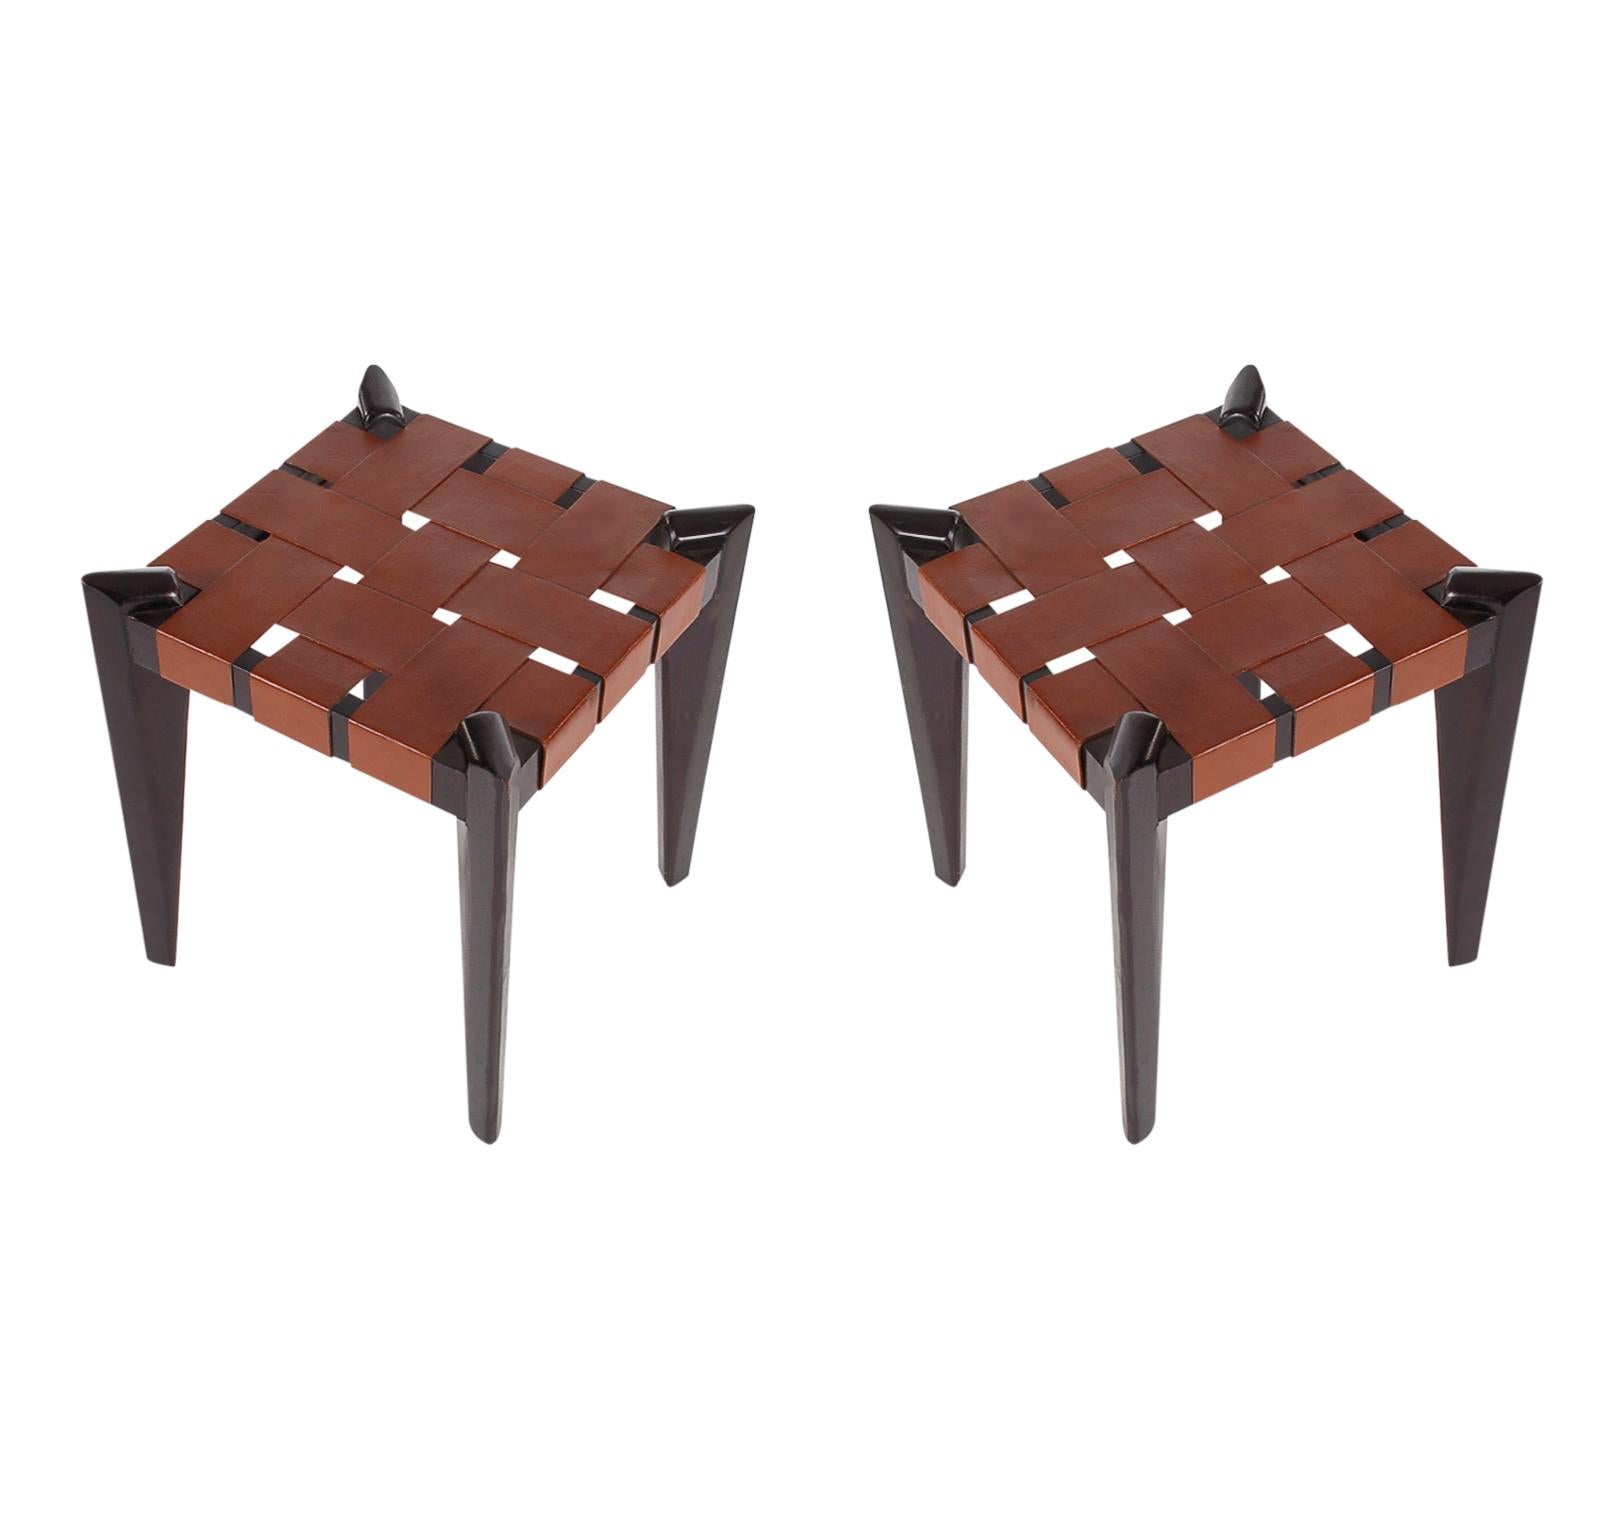 Late 20th Century Pair of Midcentury Danish Modern Woven Brown Leather Stools or Benches